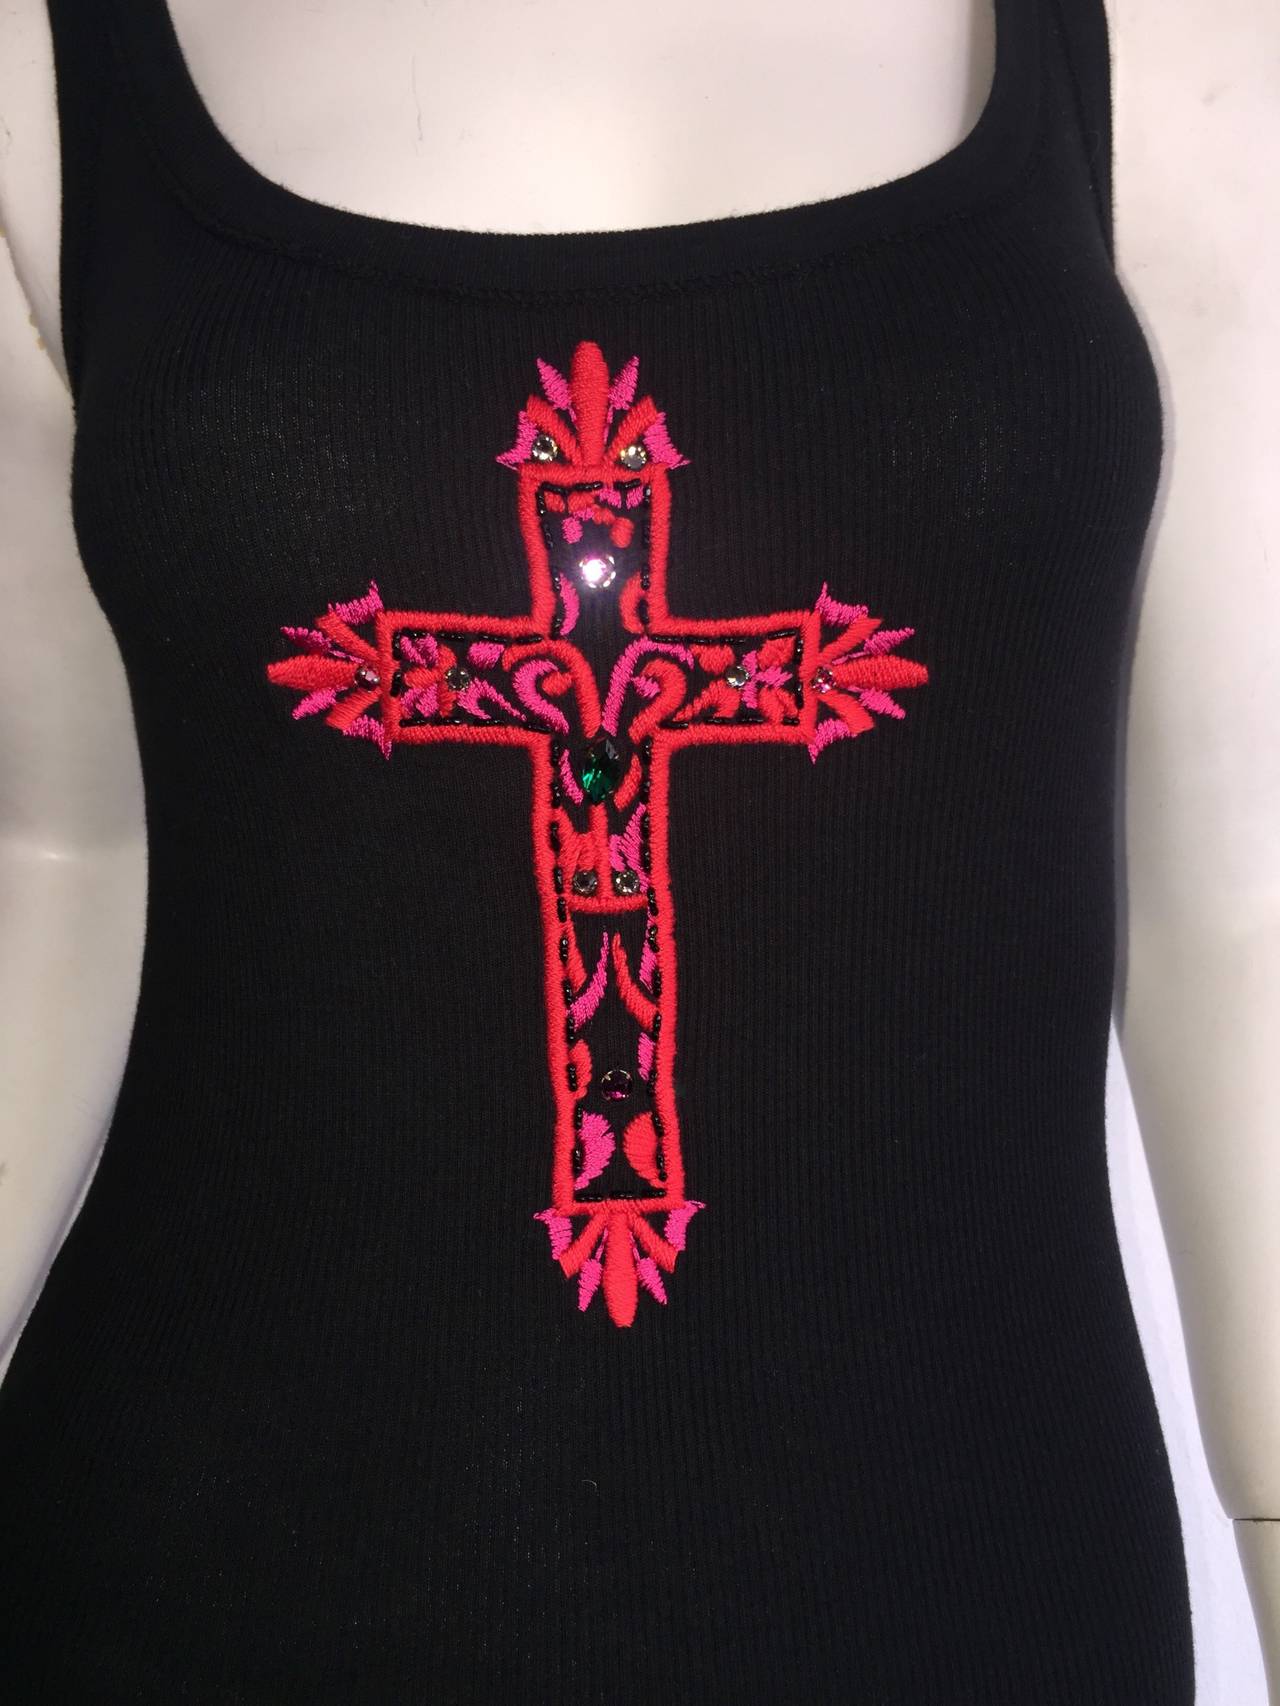 1990s Vintage Blumarine Black Cotton Tank + Pink Jeweled Cross Motif In Excellent Condition For Sale In San Diego, CA